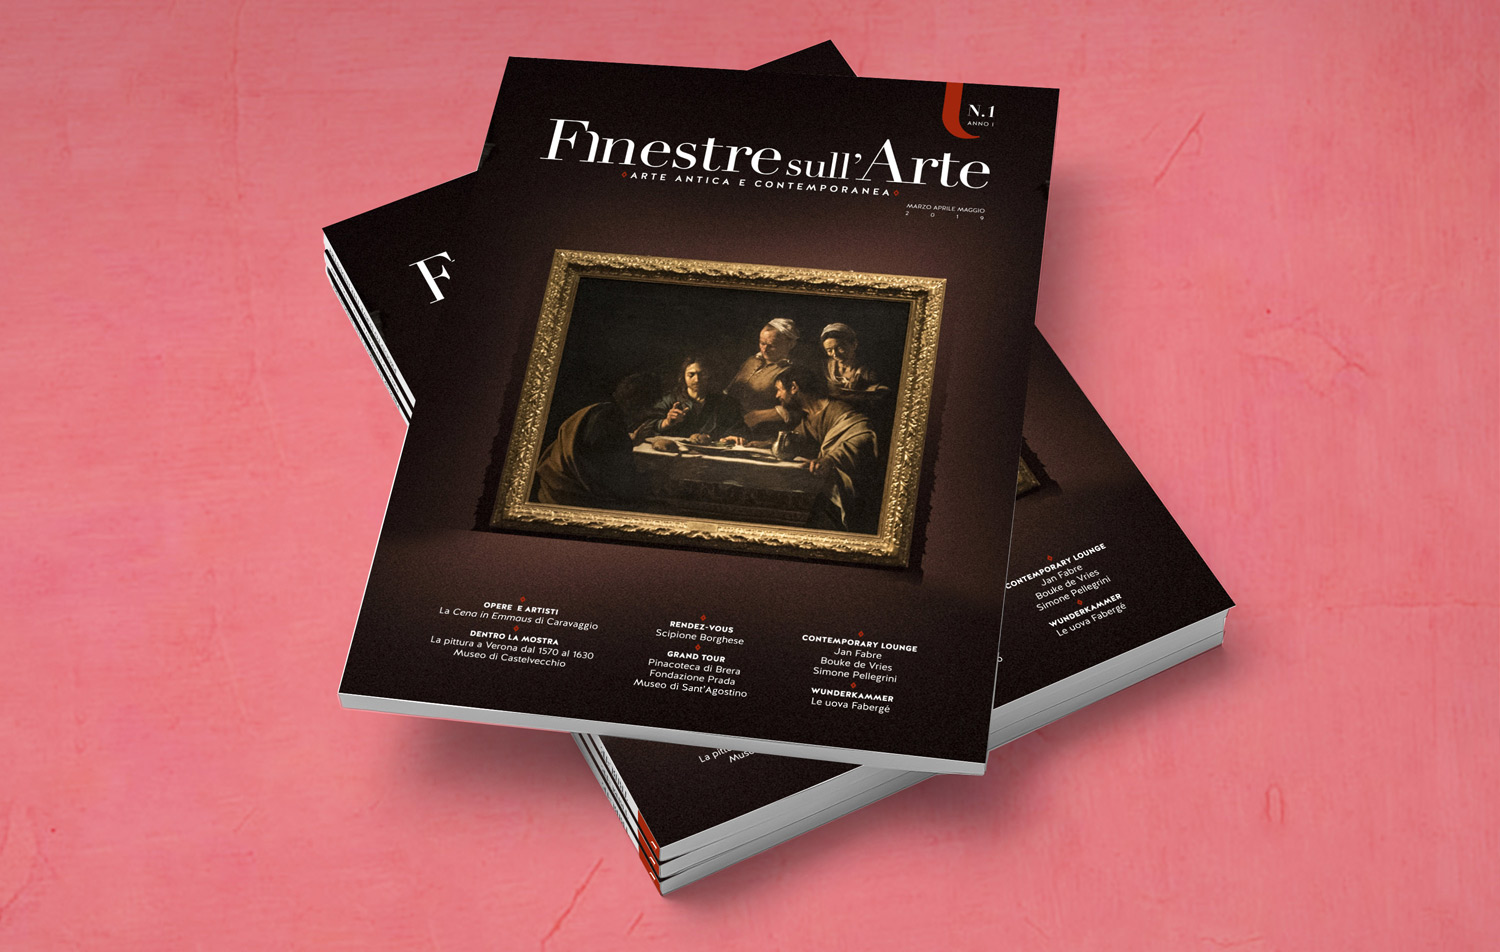 Subscribe now to the quarterly print issue of Windows on Art. You have until February 15!